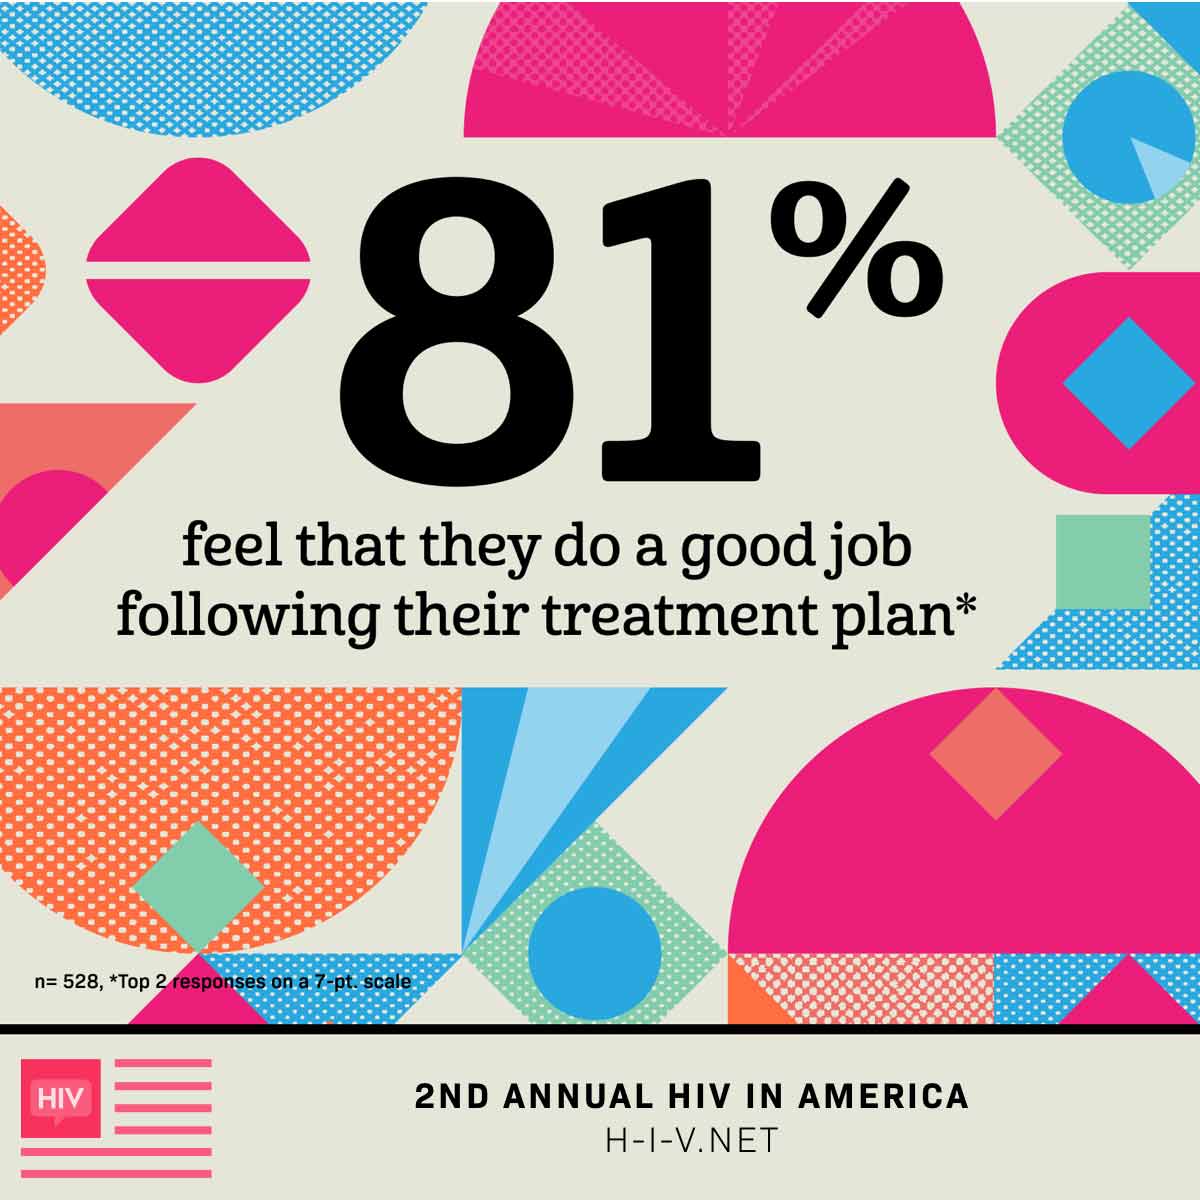 81 percent of participants believe they do a good job following their treatment plan